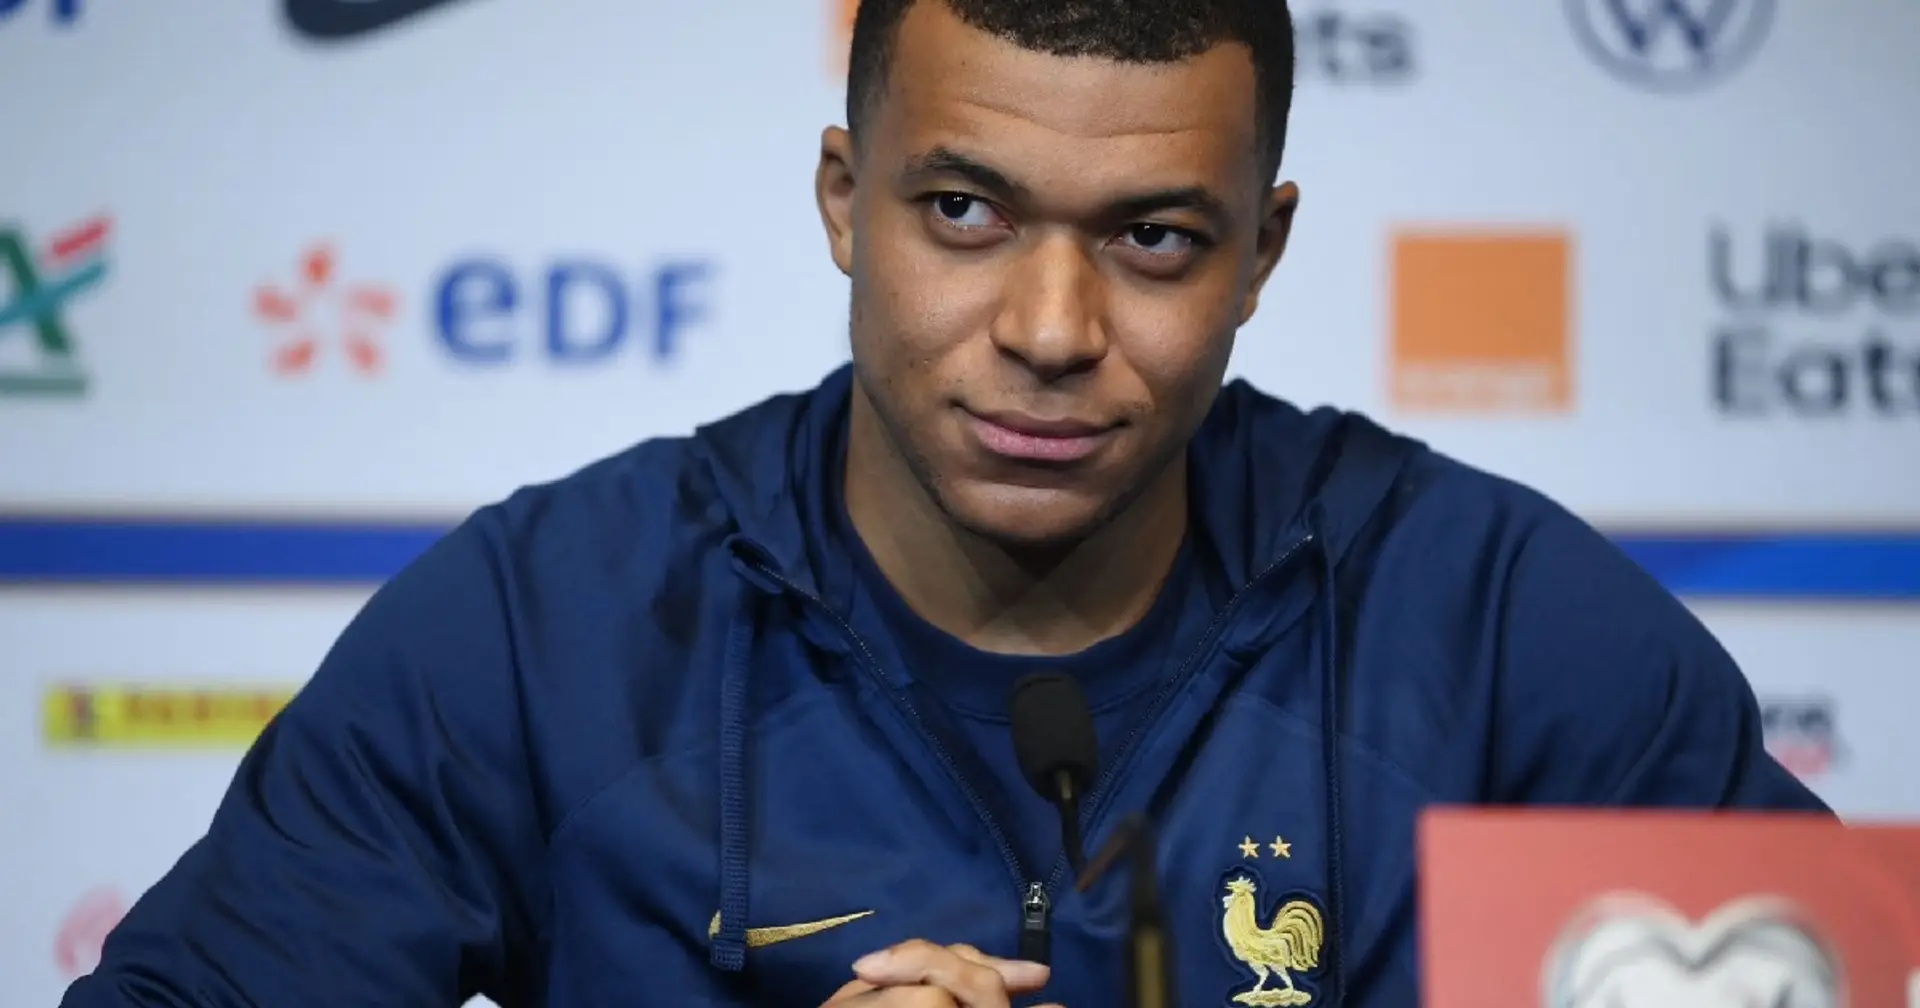 When will Madrid announce Mbappe signing?